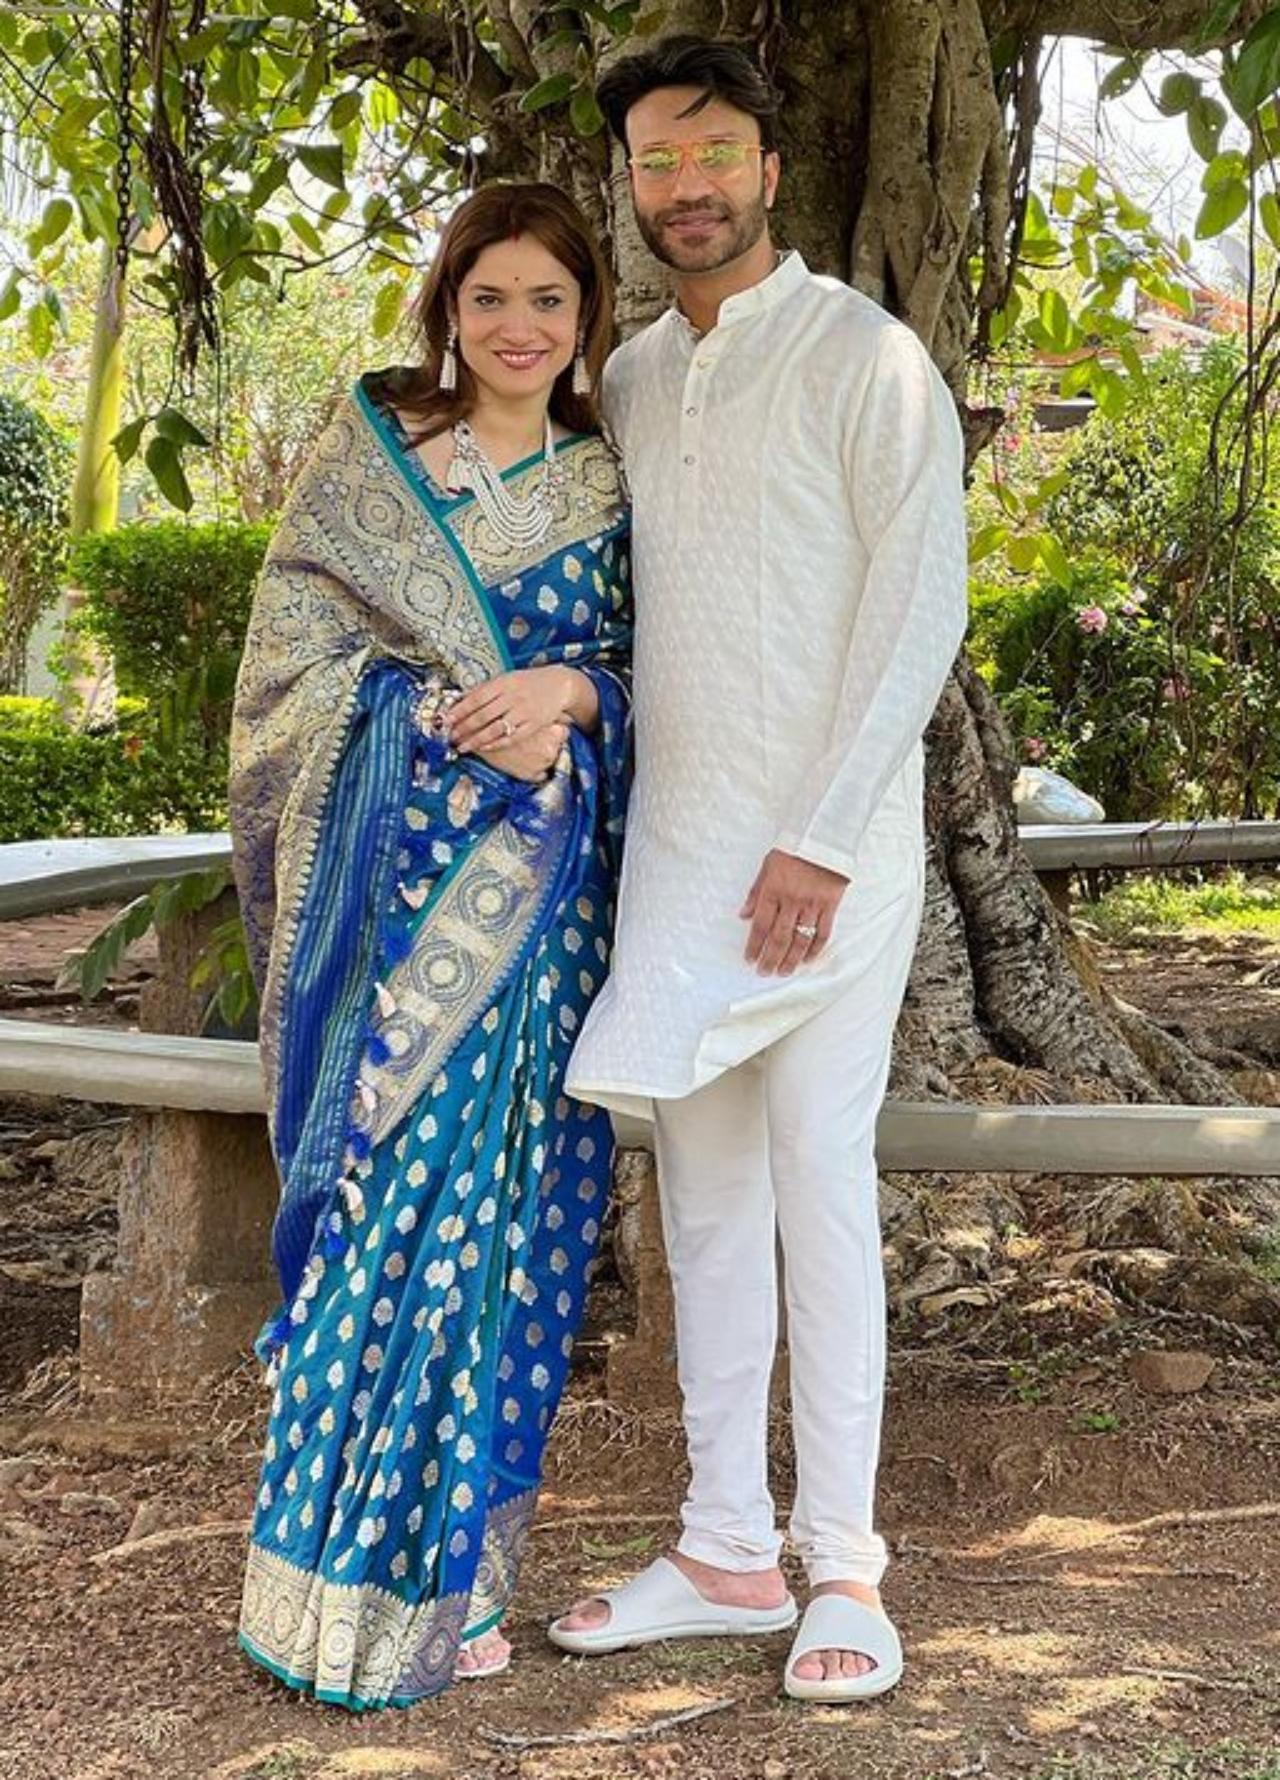 Ankita in this picture poses with her husband Vicky Jain in a printed blue saree